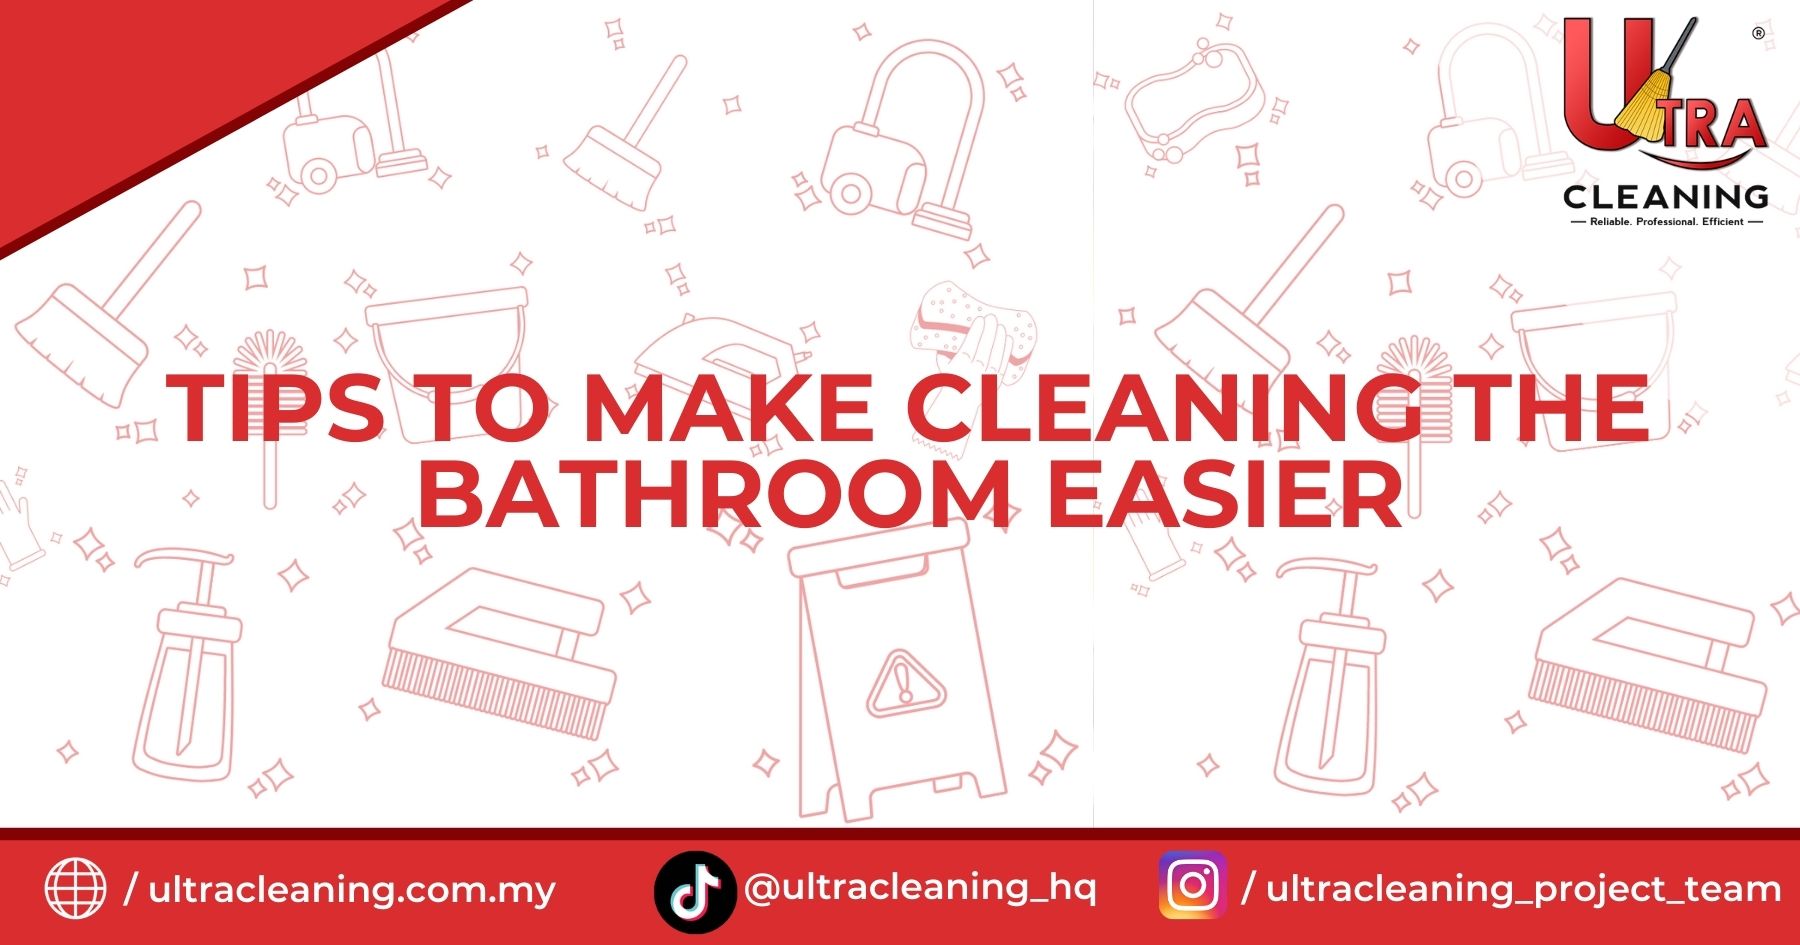 Tips to Make Cleaning the Bathroom Easier